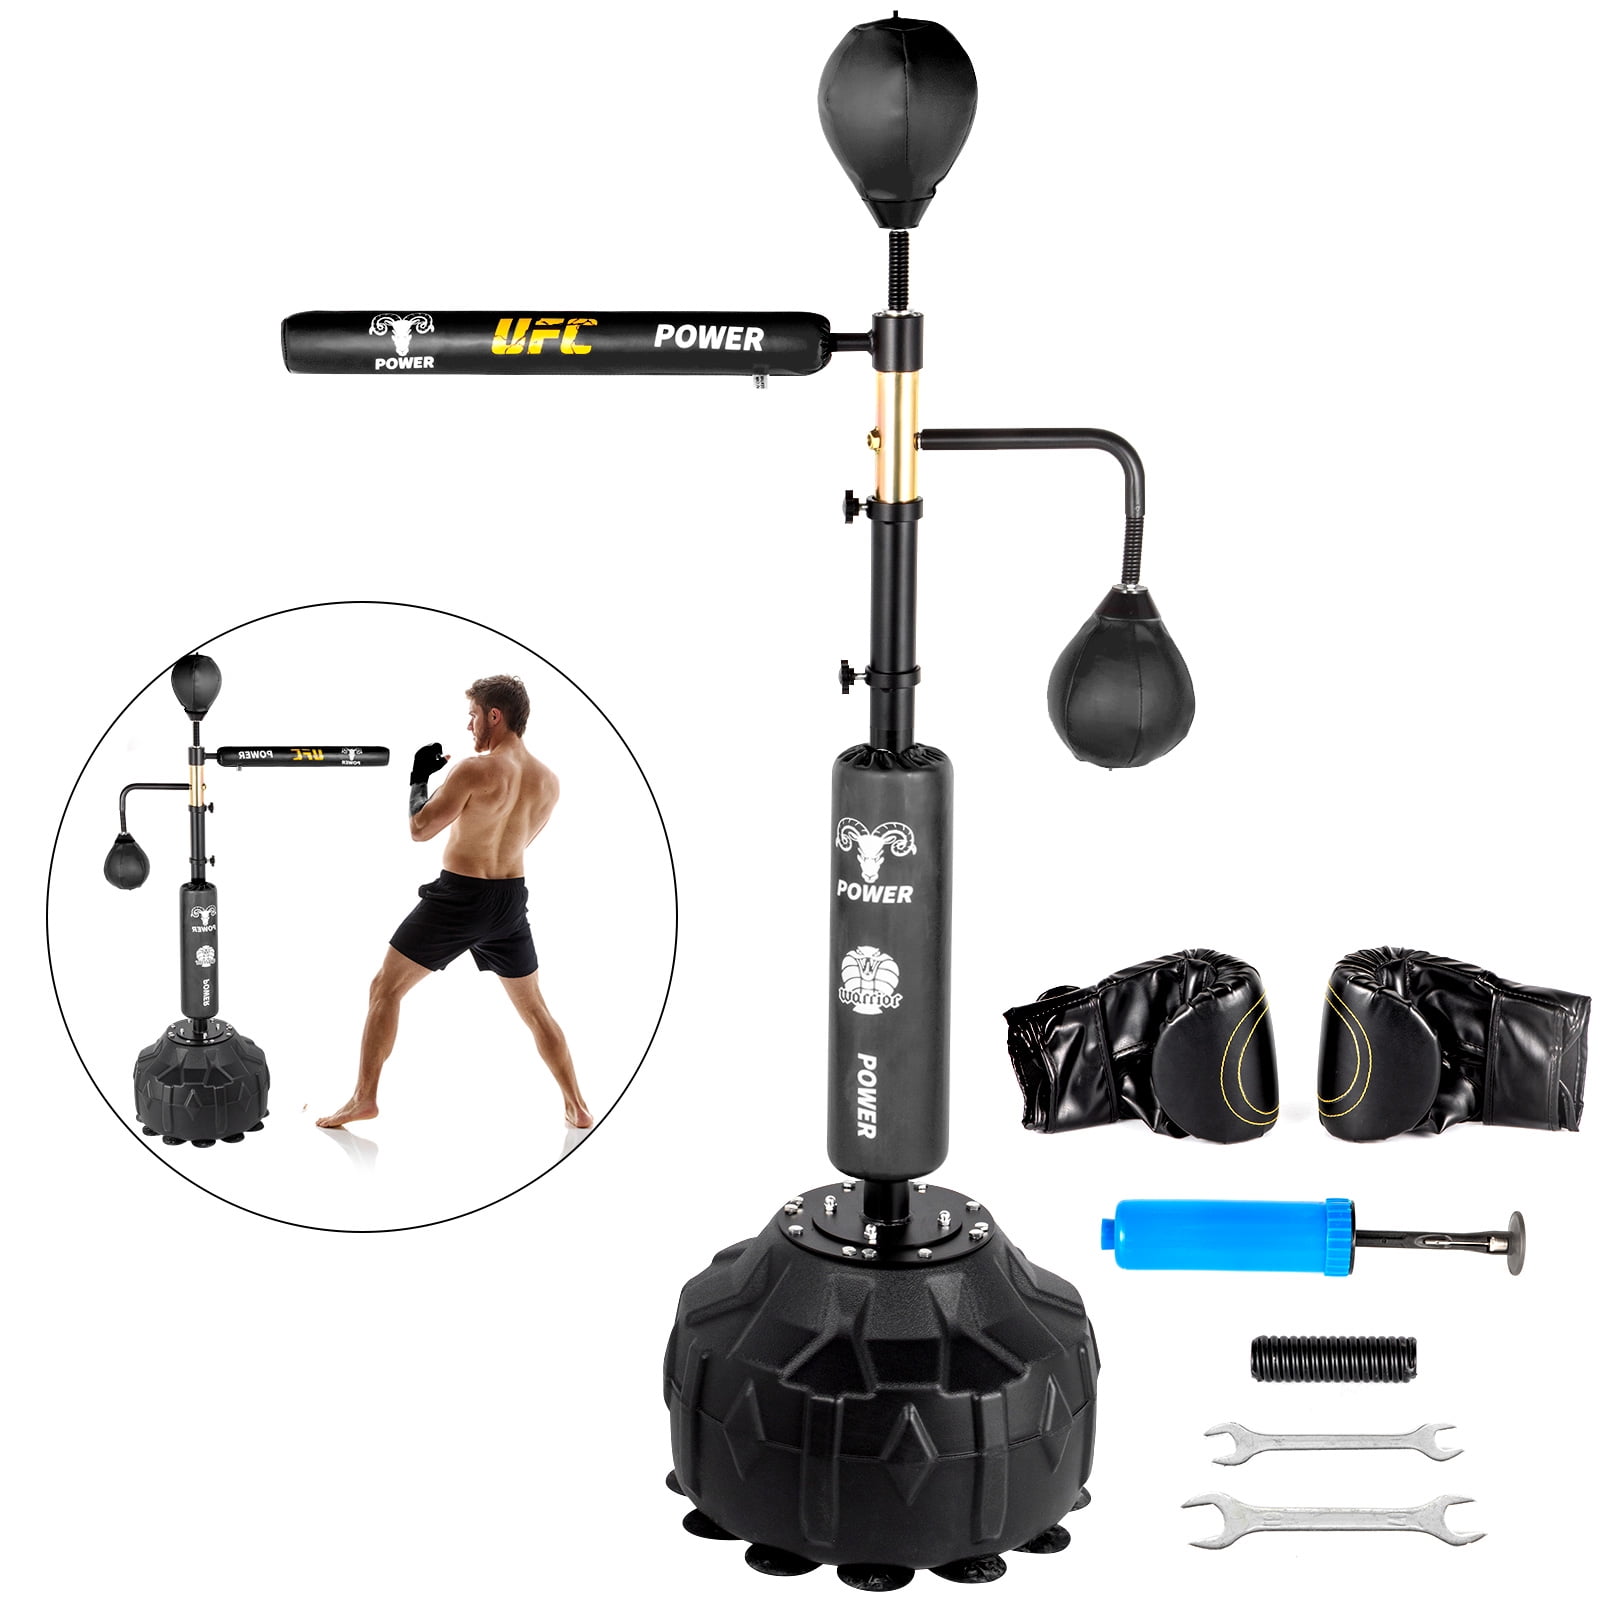 Alomejor1 Boxing Punching Bag Inflatable Boxing Punching Kick Bag Training Tumbler Bag for Pressure Relief Body Building 